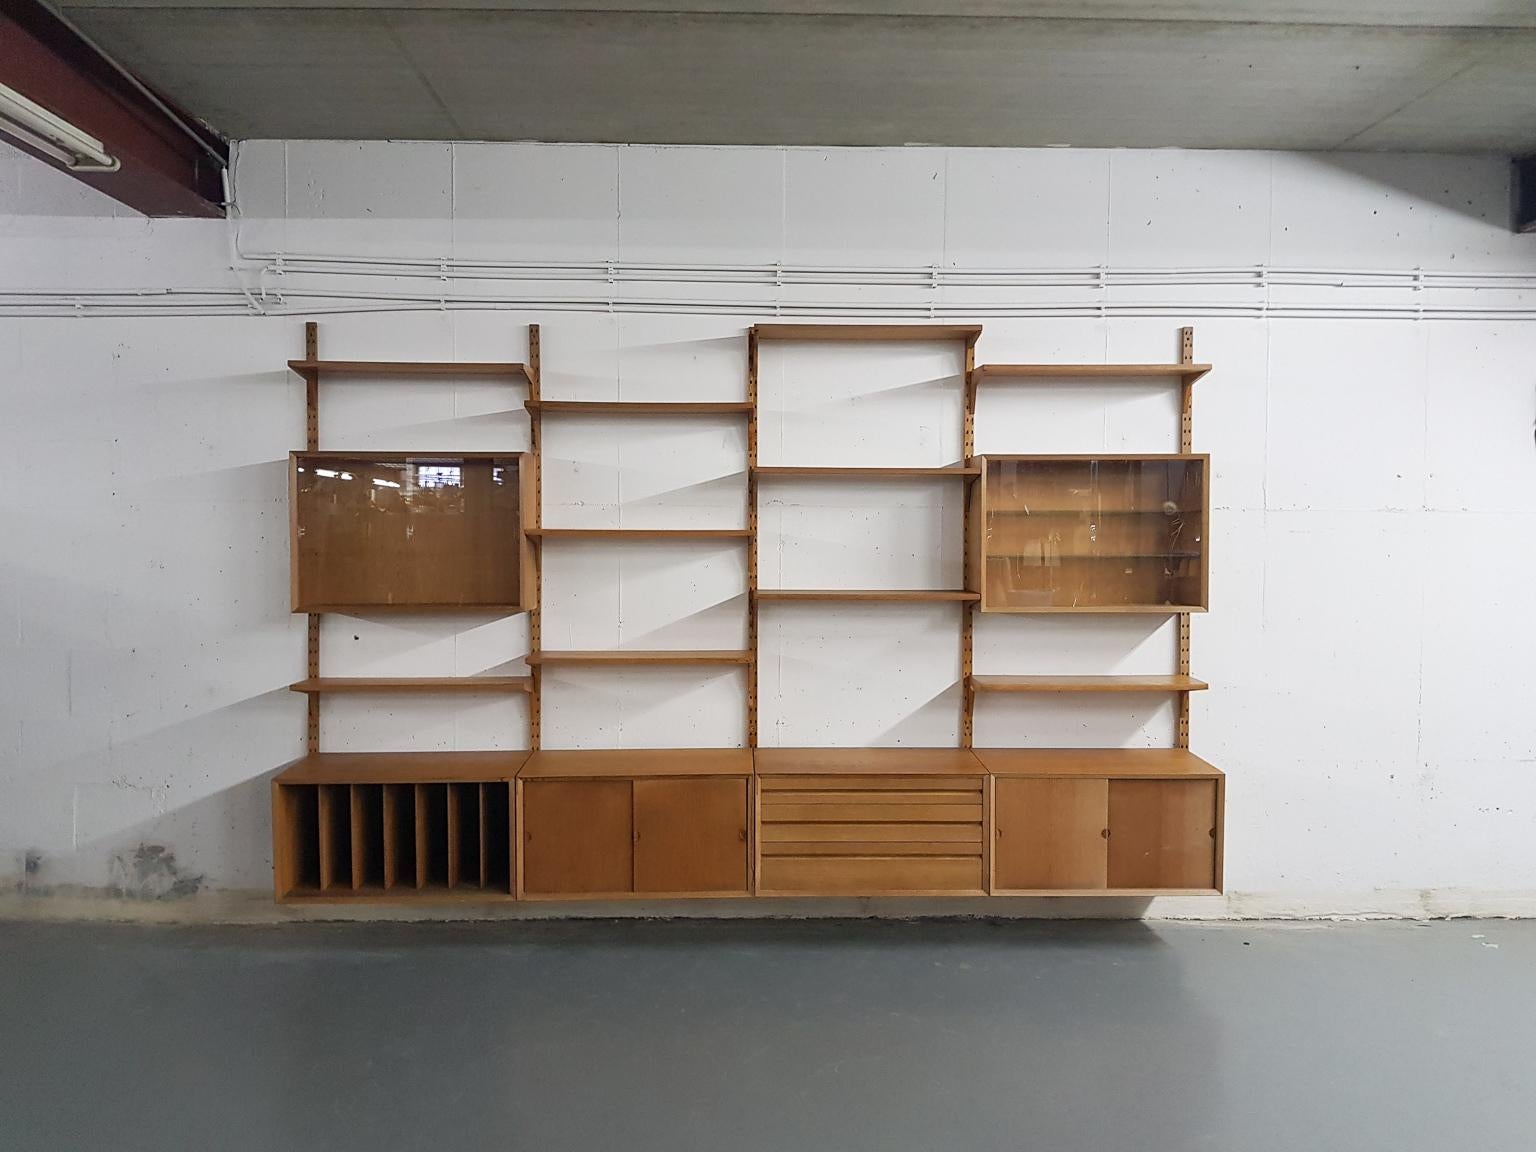 Large Danish design oak wall system or shelving unit by Poul Cadovius for Cado, designed in Denmark in 1964.

When you ask someone to think of an European midcentury wall unit, most will probably think of Poul Cadovius and his shelving system. It